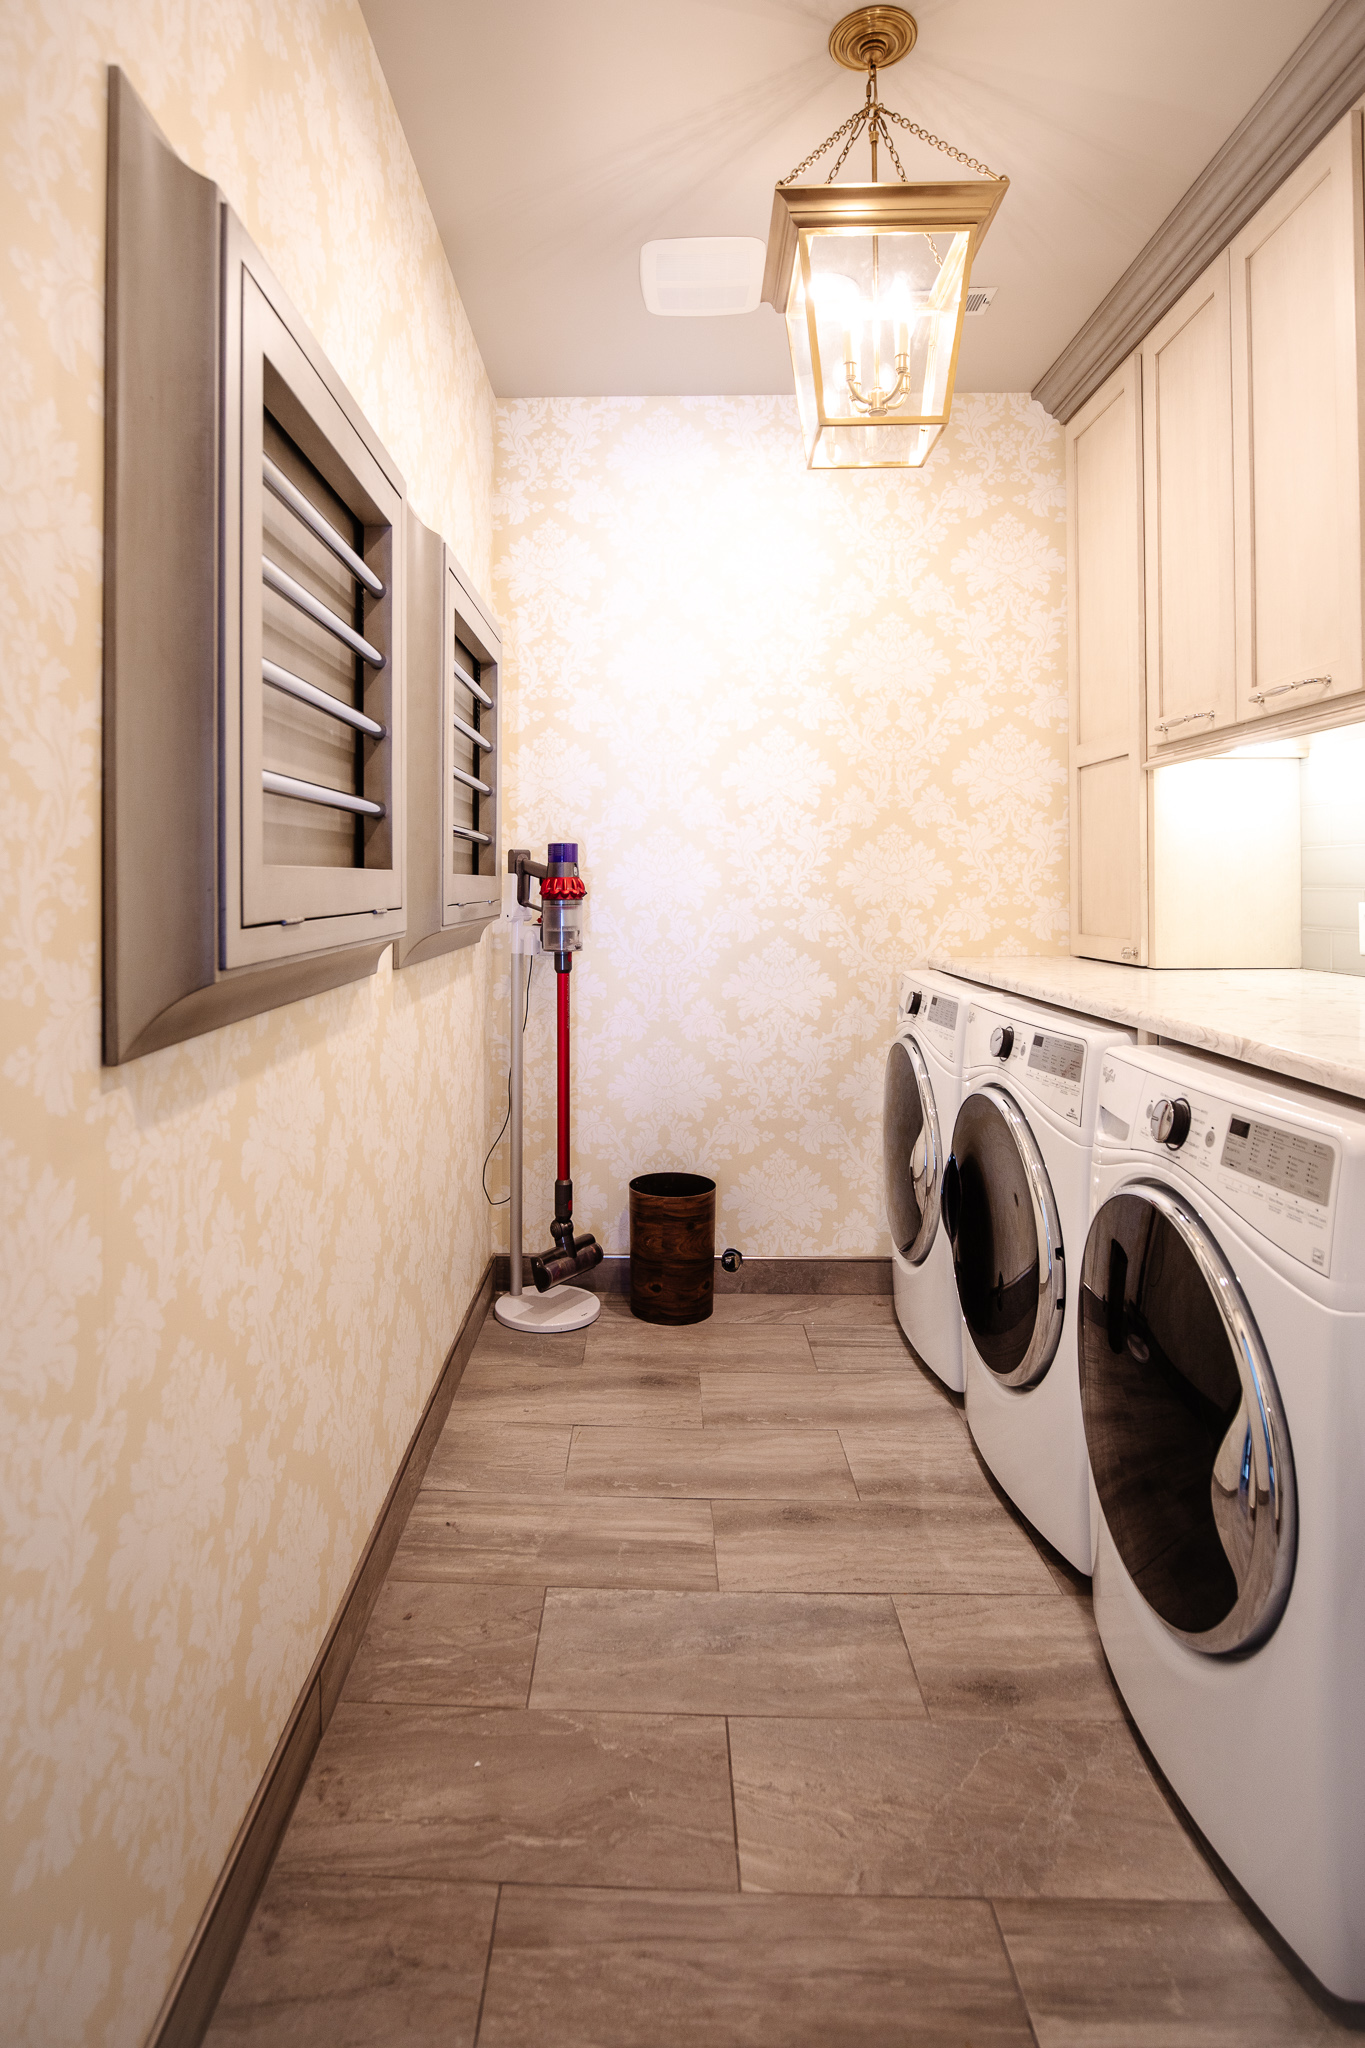 Wallpapered Laundry Room  The Lilypad Cottage